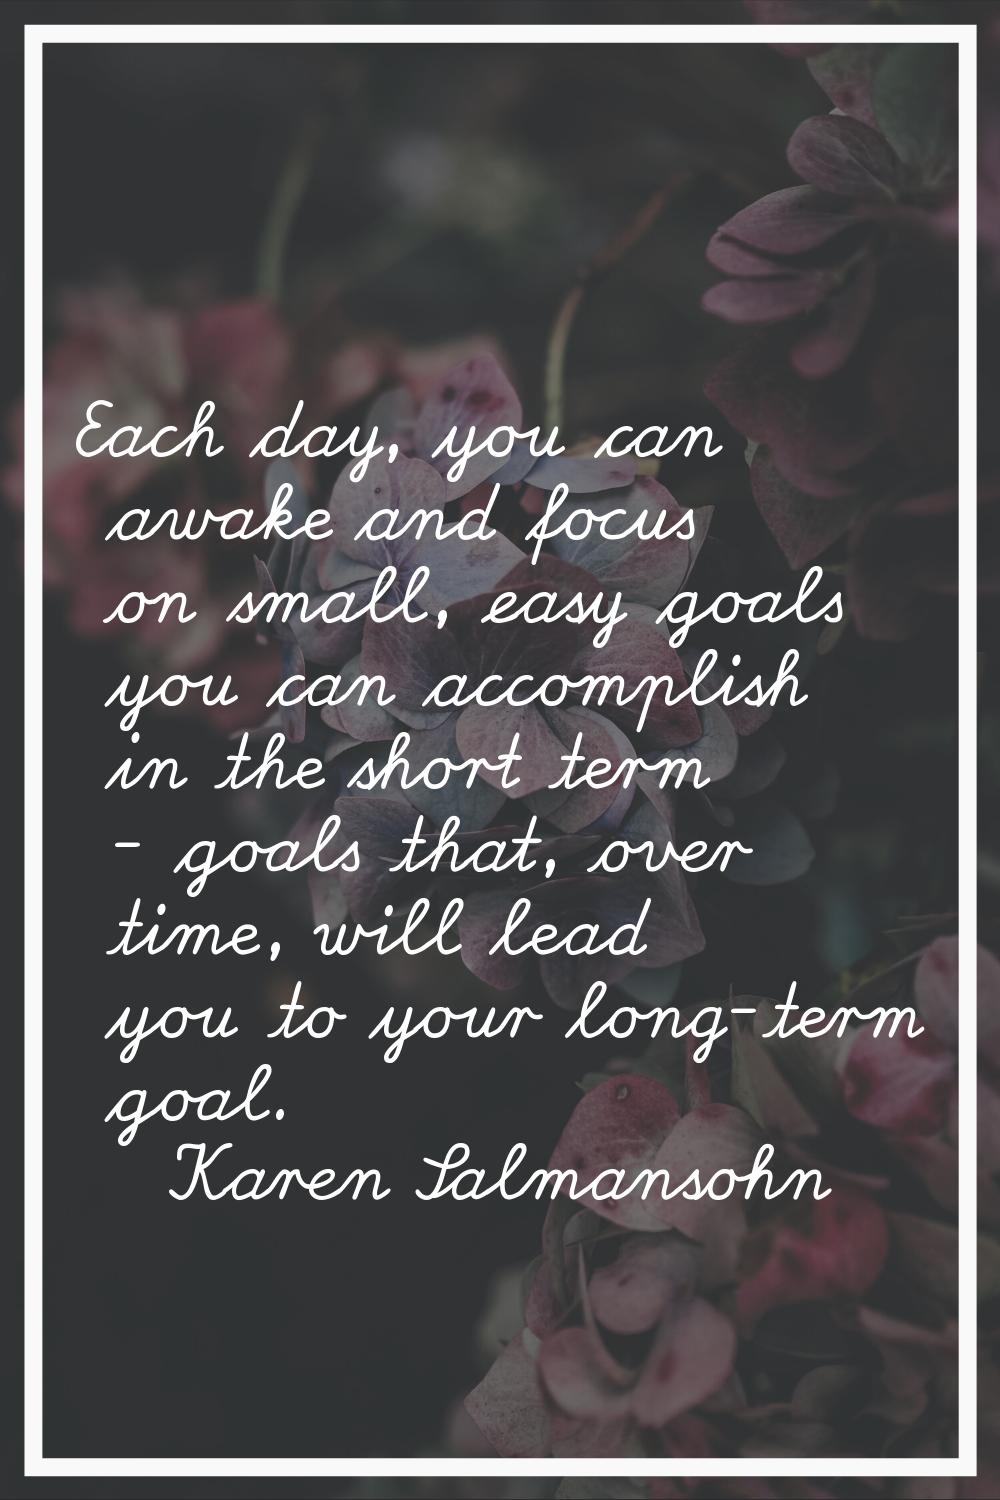 Each day, you can awake and focus on small, easy goals you can accomplish in the short term - goals